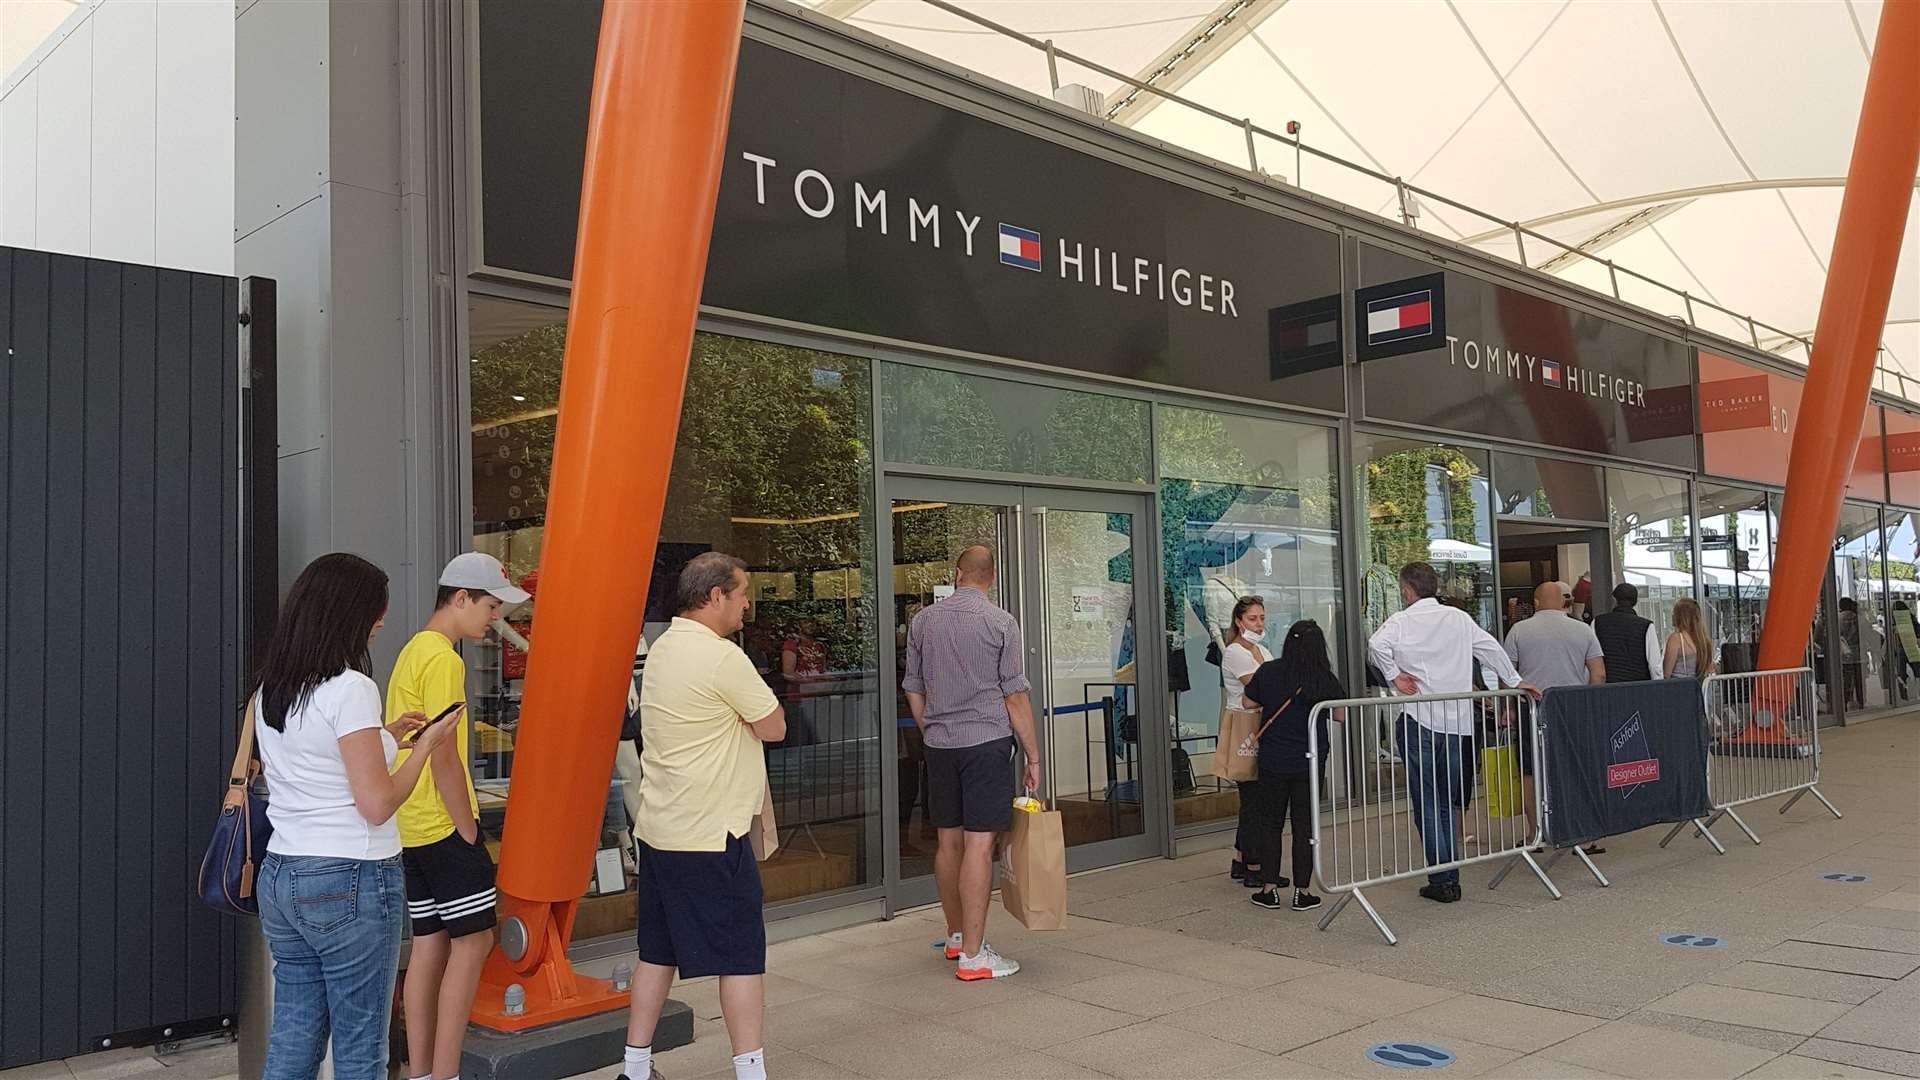 More than £700 worth of clothes had been stolen from Tommy Hilfiger at Ashford Designer Outlet